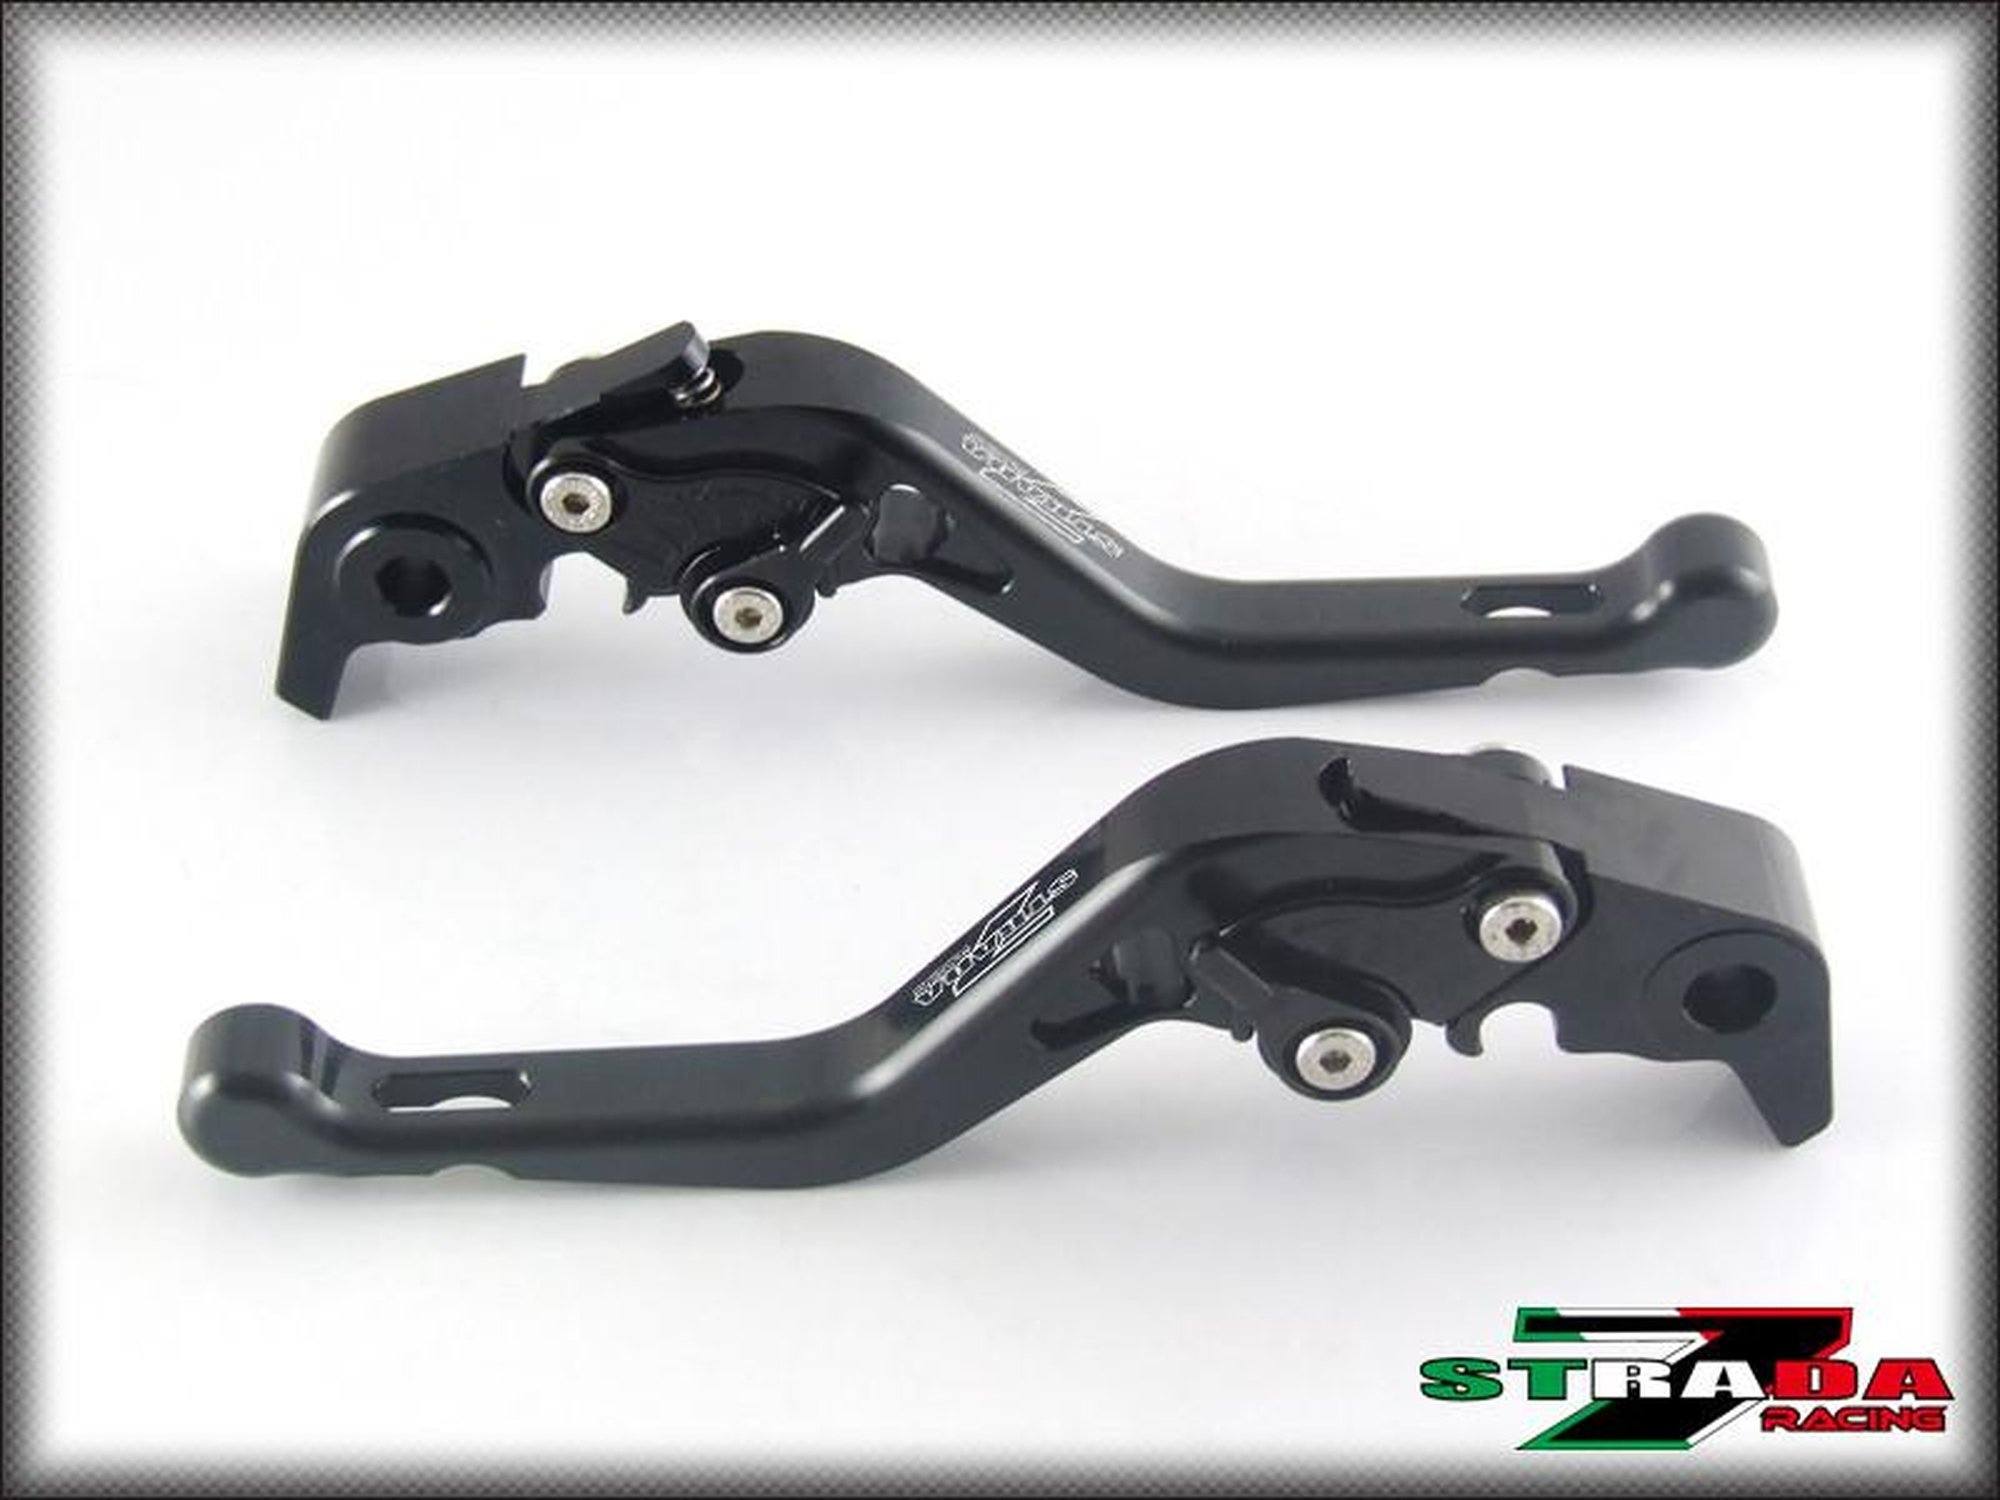 Strada 7 Racing Short CNC Adjustable Levers Brake and Clutch Levers (7 Colours)